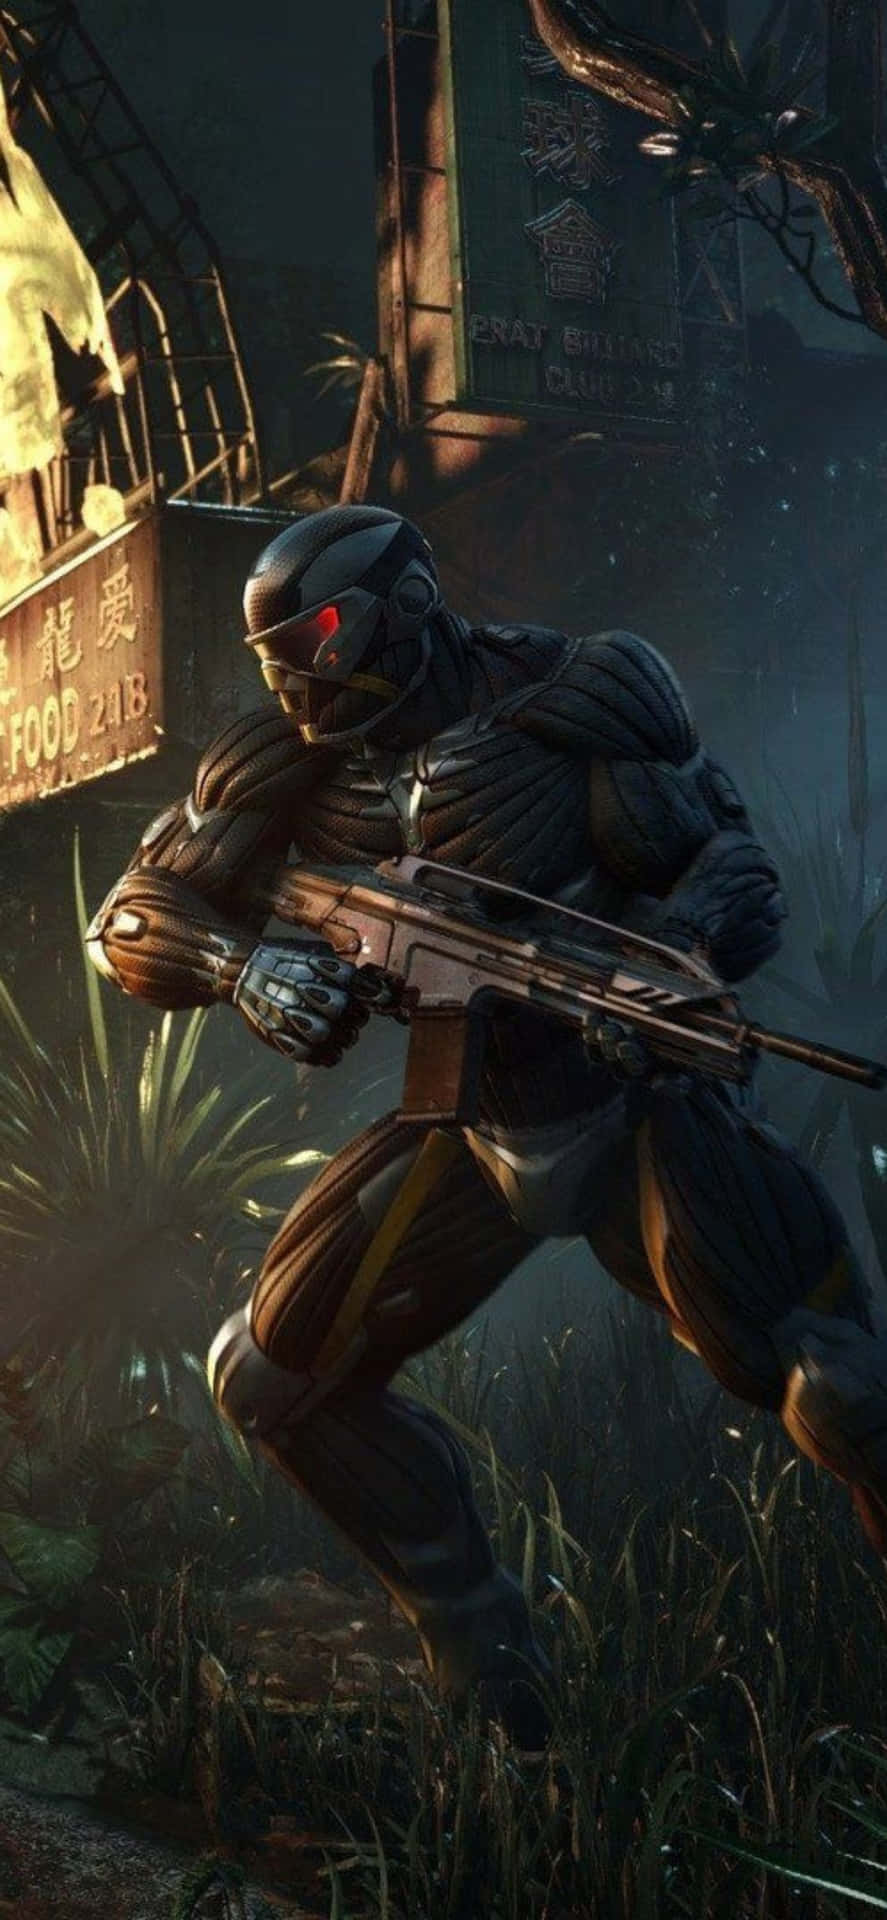 Experience a thrilling adventure on your iPhone X with Crysis 3